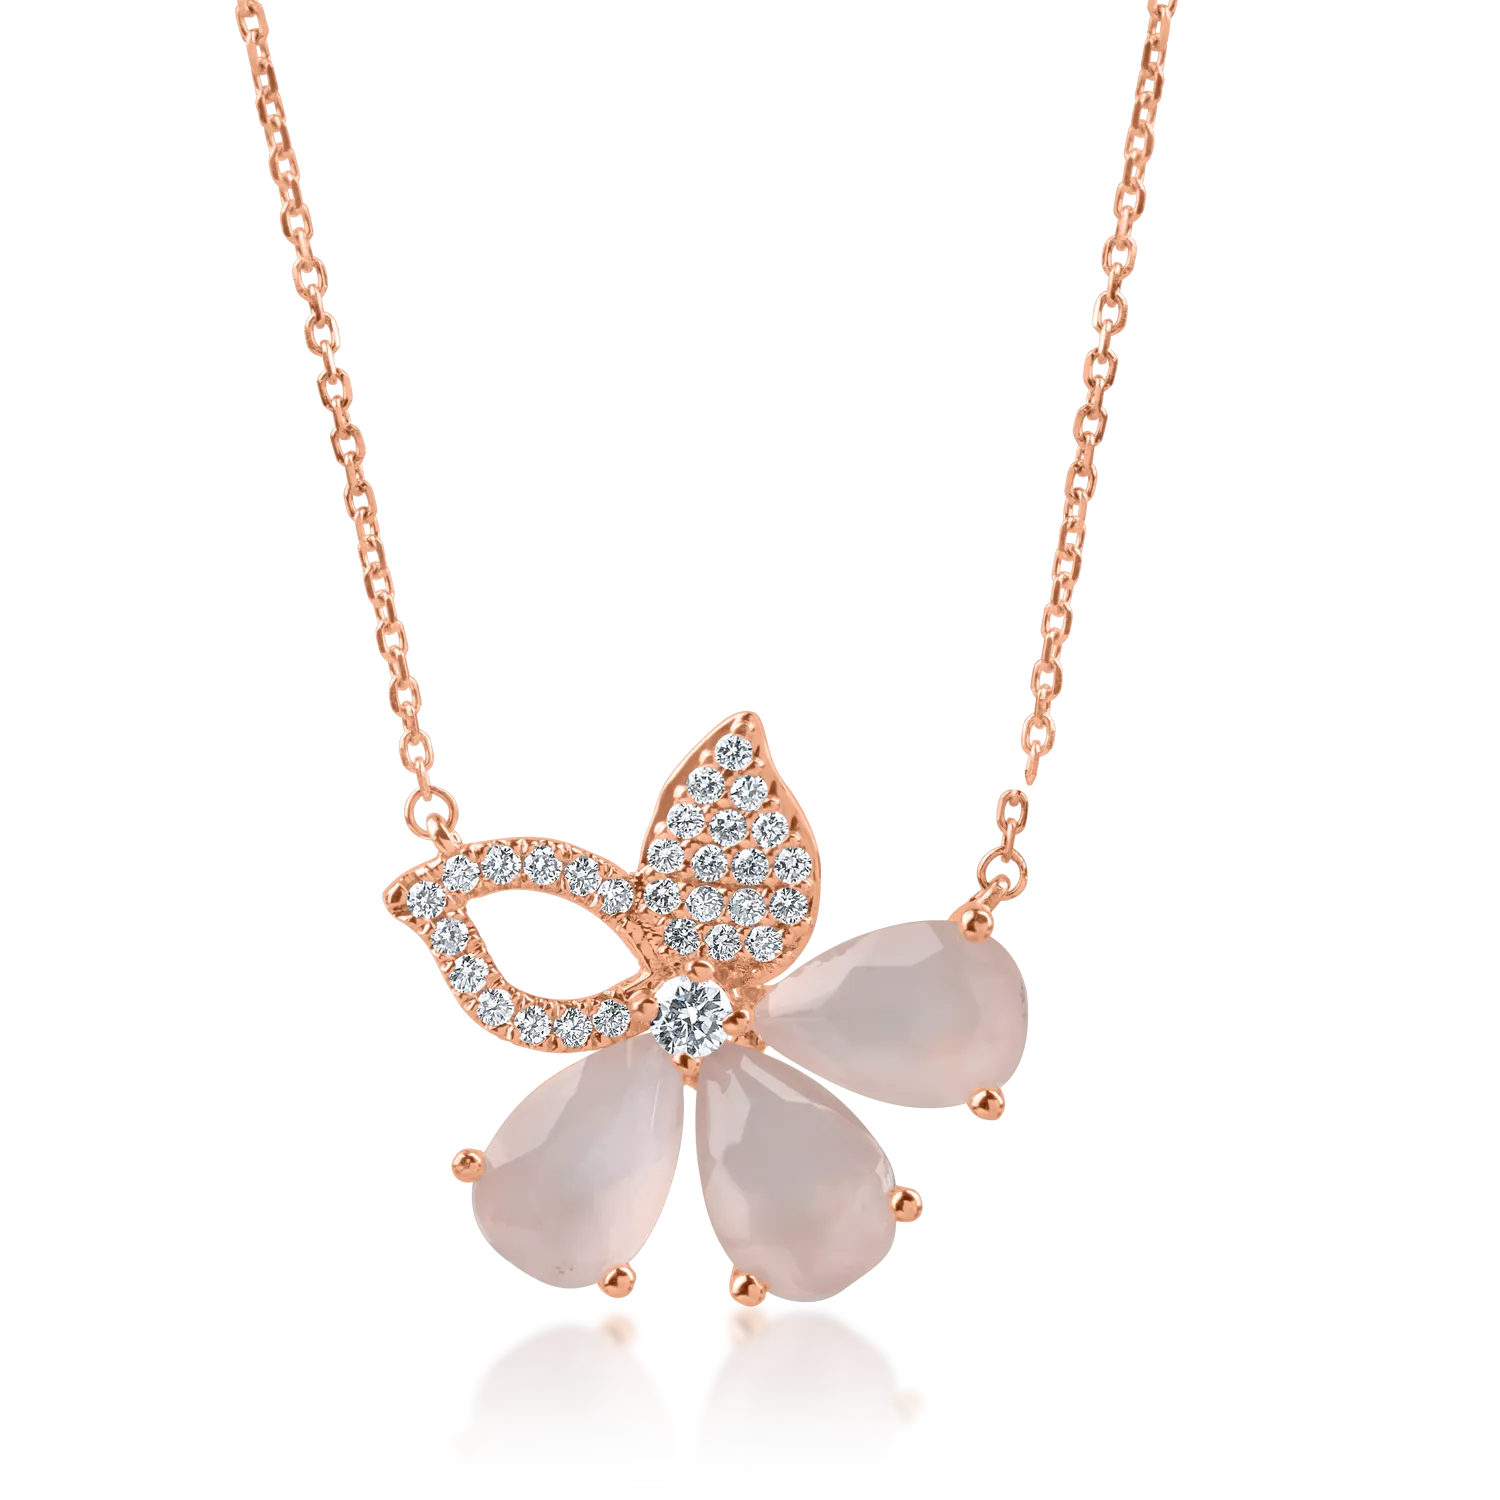 Rose gold flower pendant chain with 3.12ct rose quartz and 0.29ct diamonds